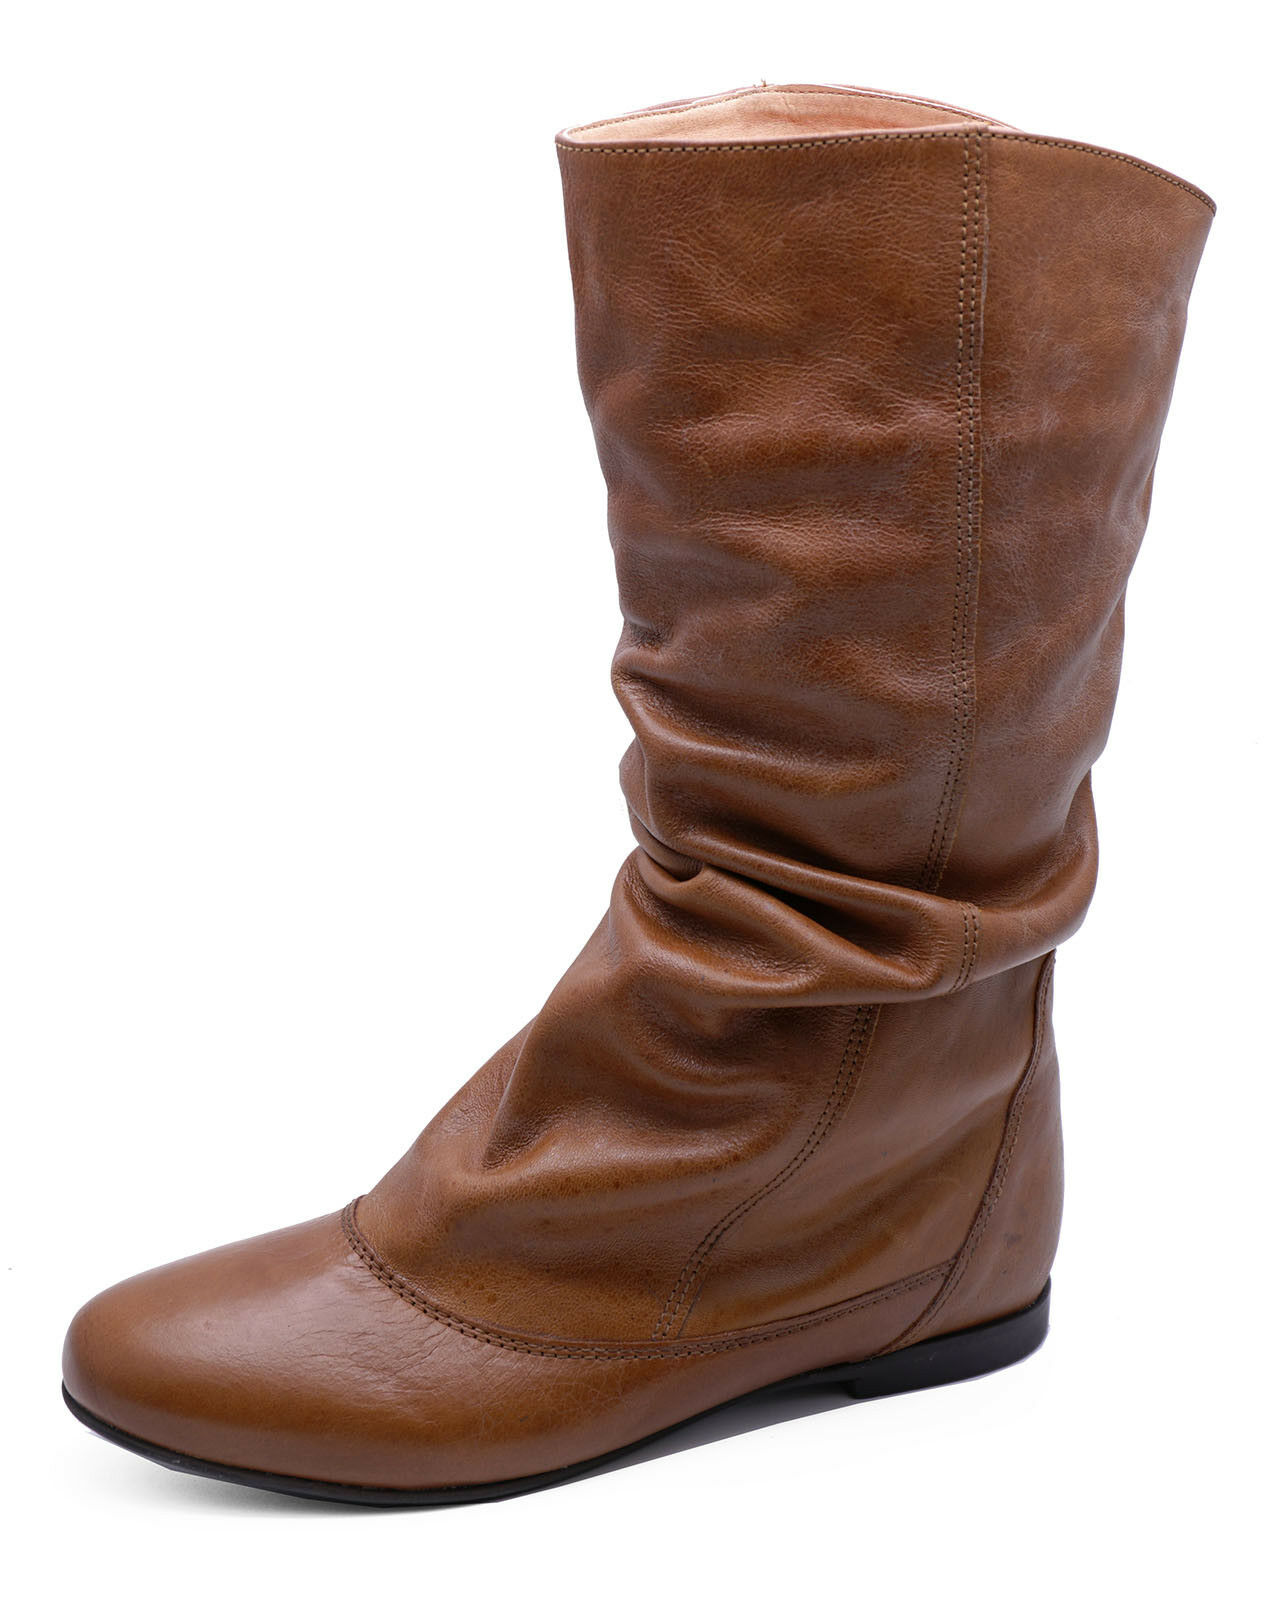 Buy > tall brown flat boots > in stock